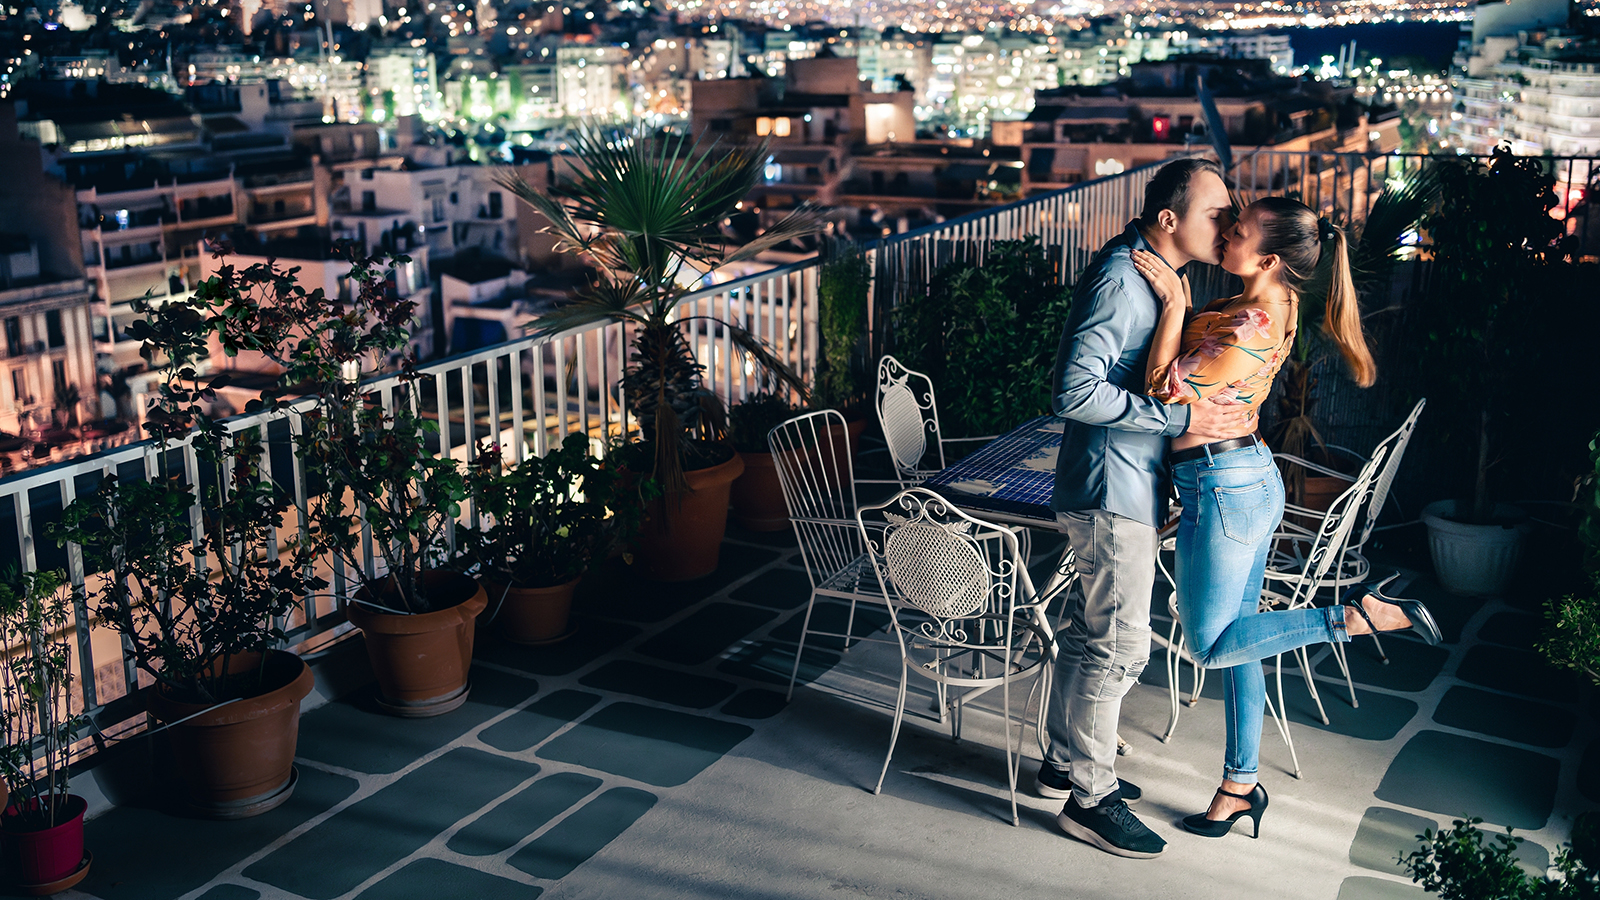 Couple at night, city lights view. Romantic date or proposal. Man and woman kiss and embrace on balcony or roof terrace. Dark blue sky and charming town in the background in summer. Happy relationship